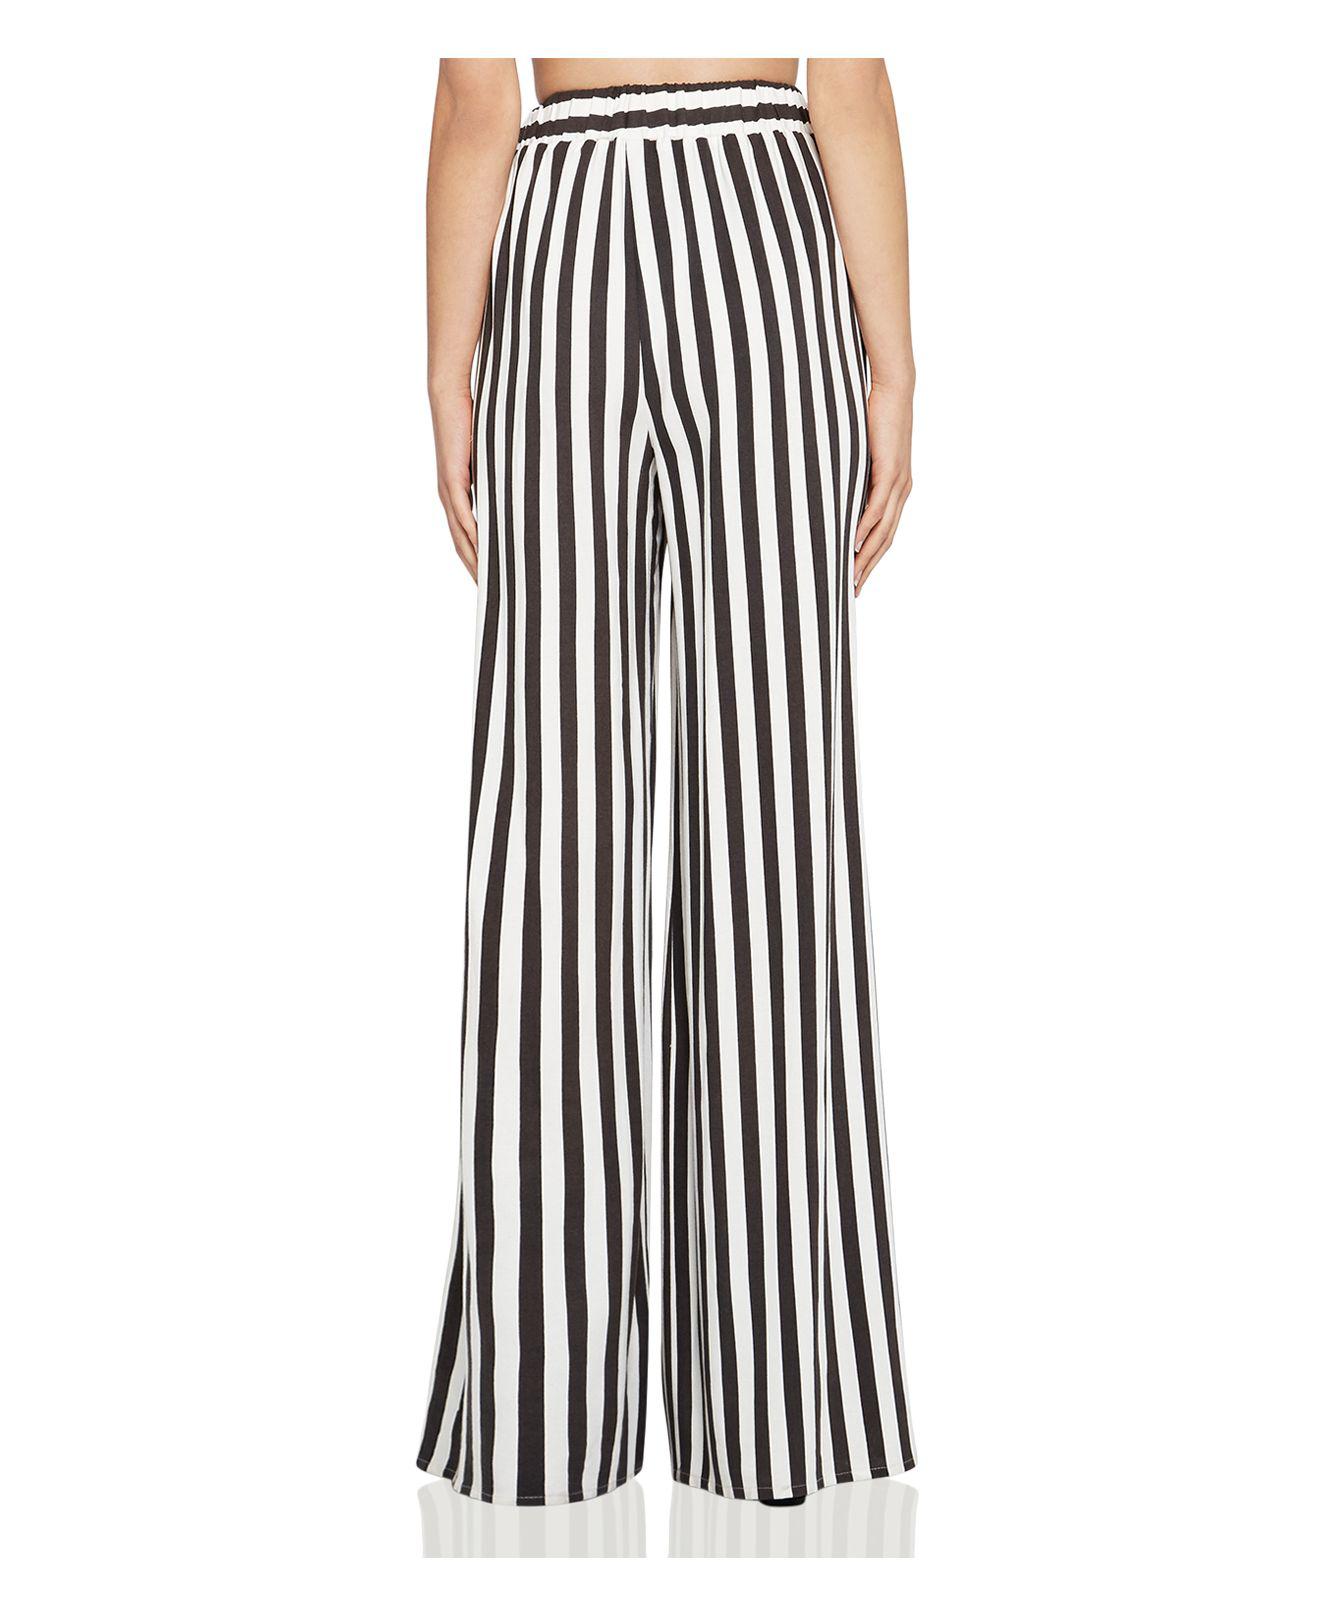 Lyst - Bcbgeneration Striped Palazzo Pants in Black